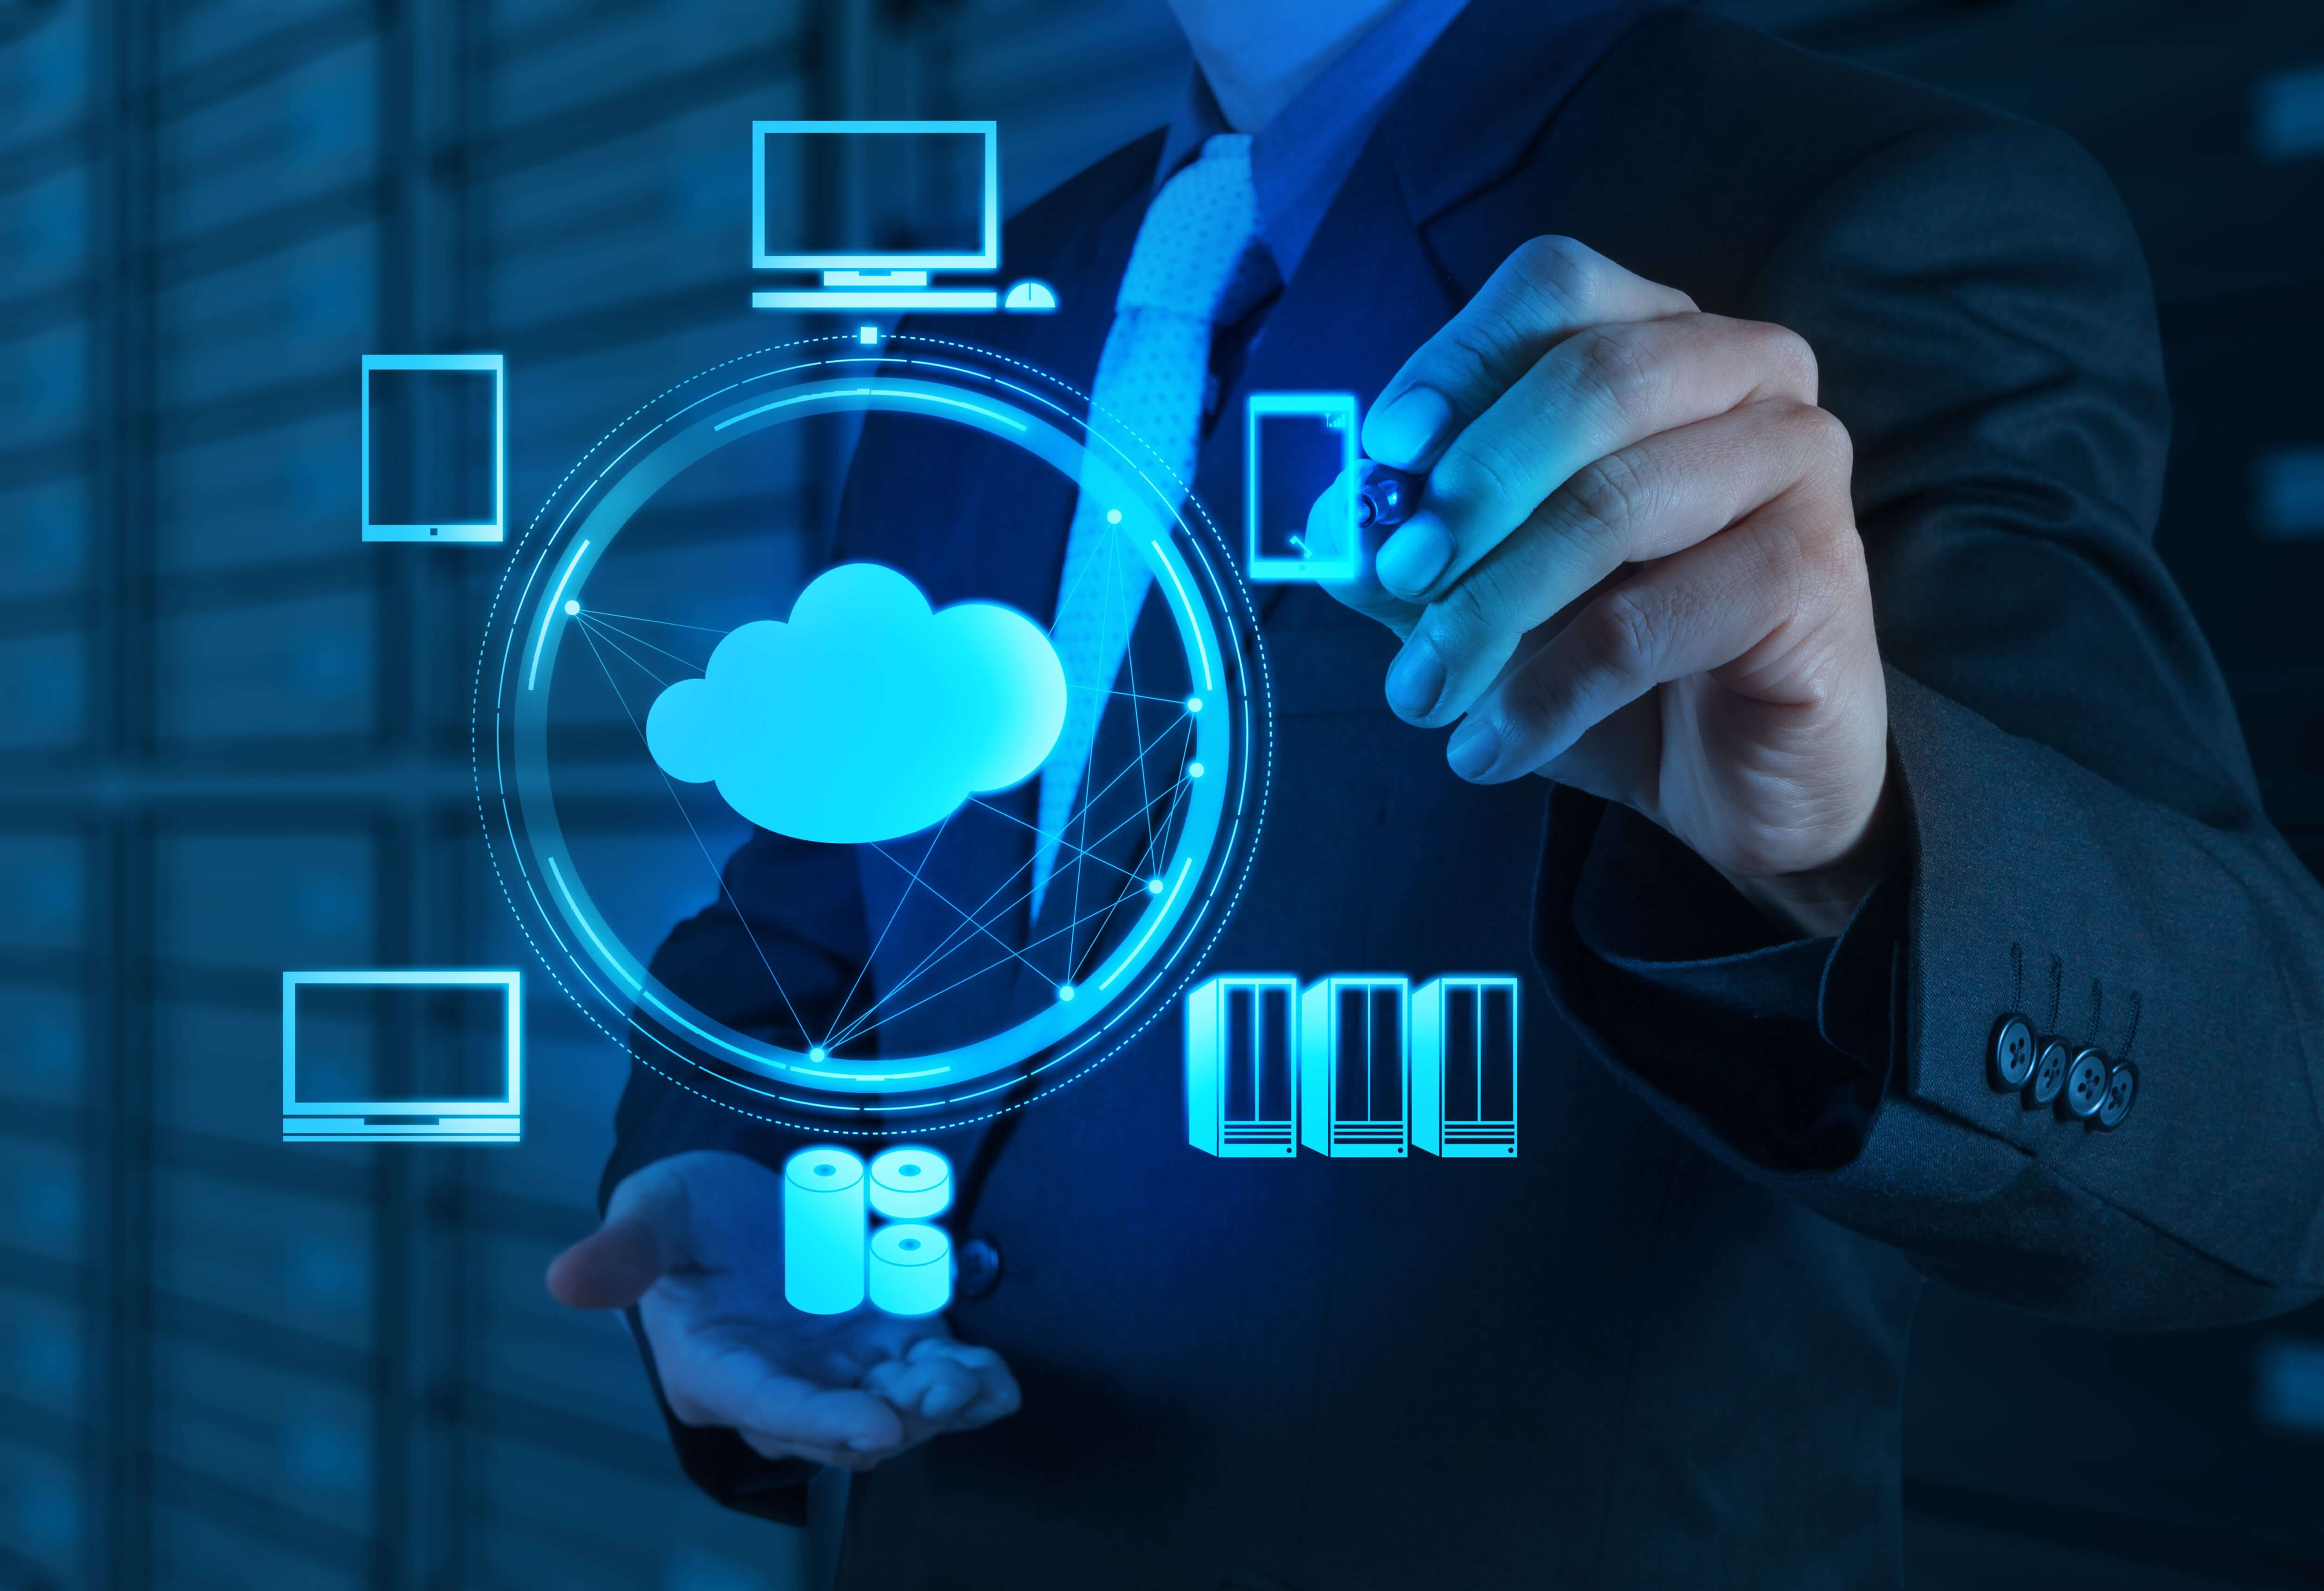 Virtualization: The 5 Elements That Turn a Virtualized Environment Into a Private Cloud